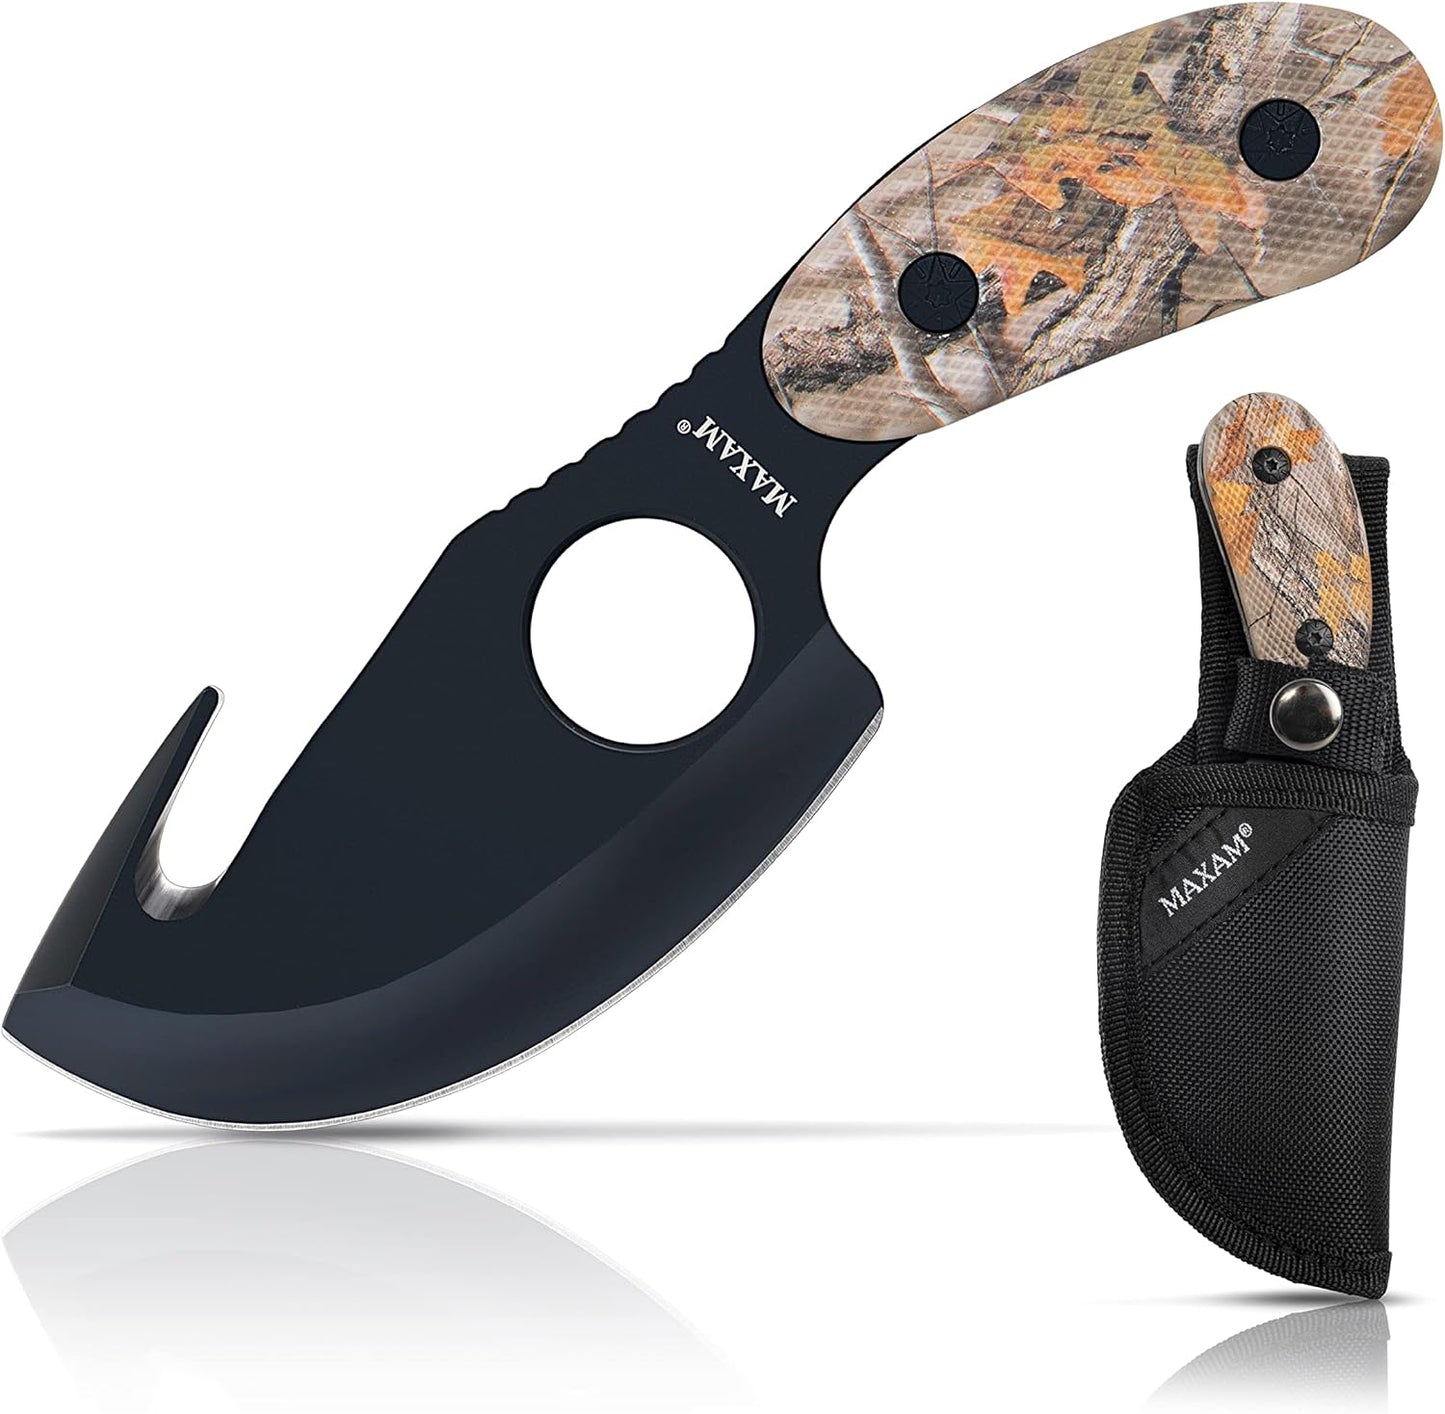 KD Hunting Knife with Gut-Hook, Skinning Knife Includes Nylon